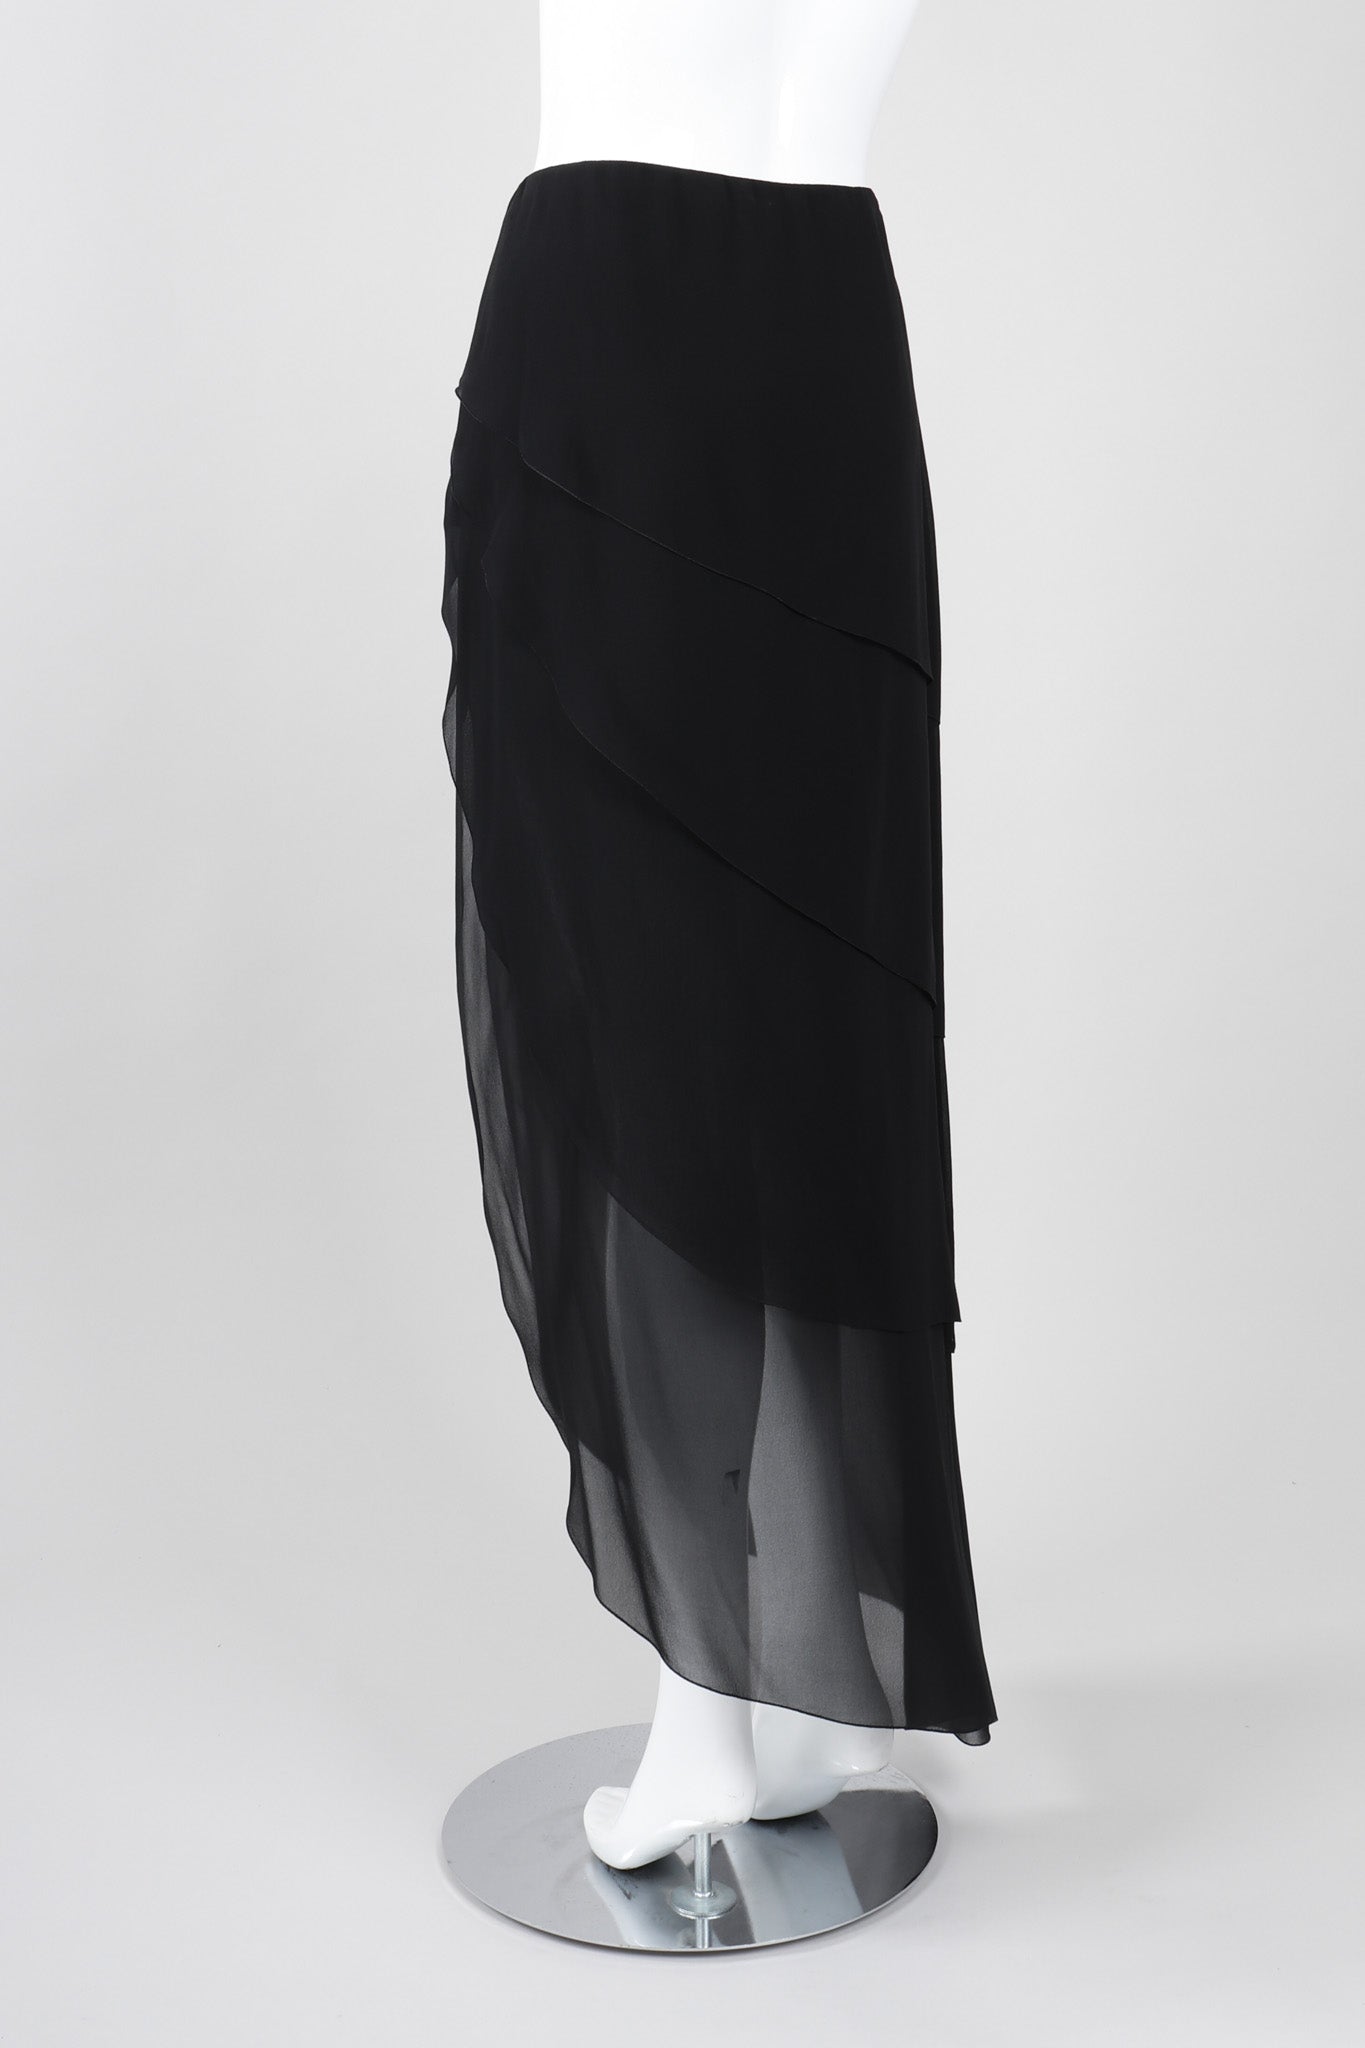 Recess Los Angeles Vintage Chanel Asymmetrical Tiered Chiffon Skirt